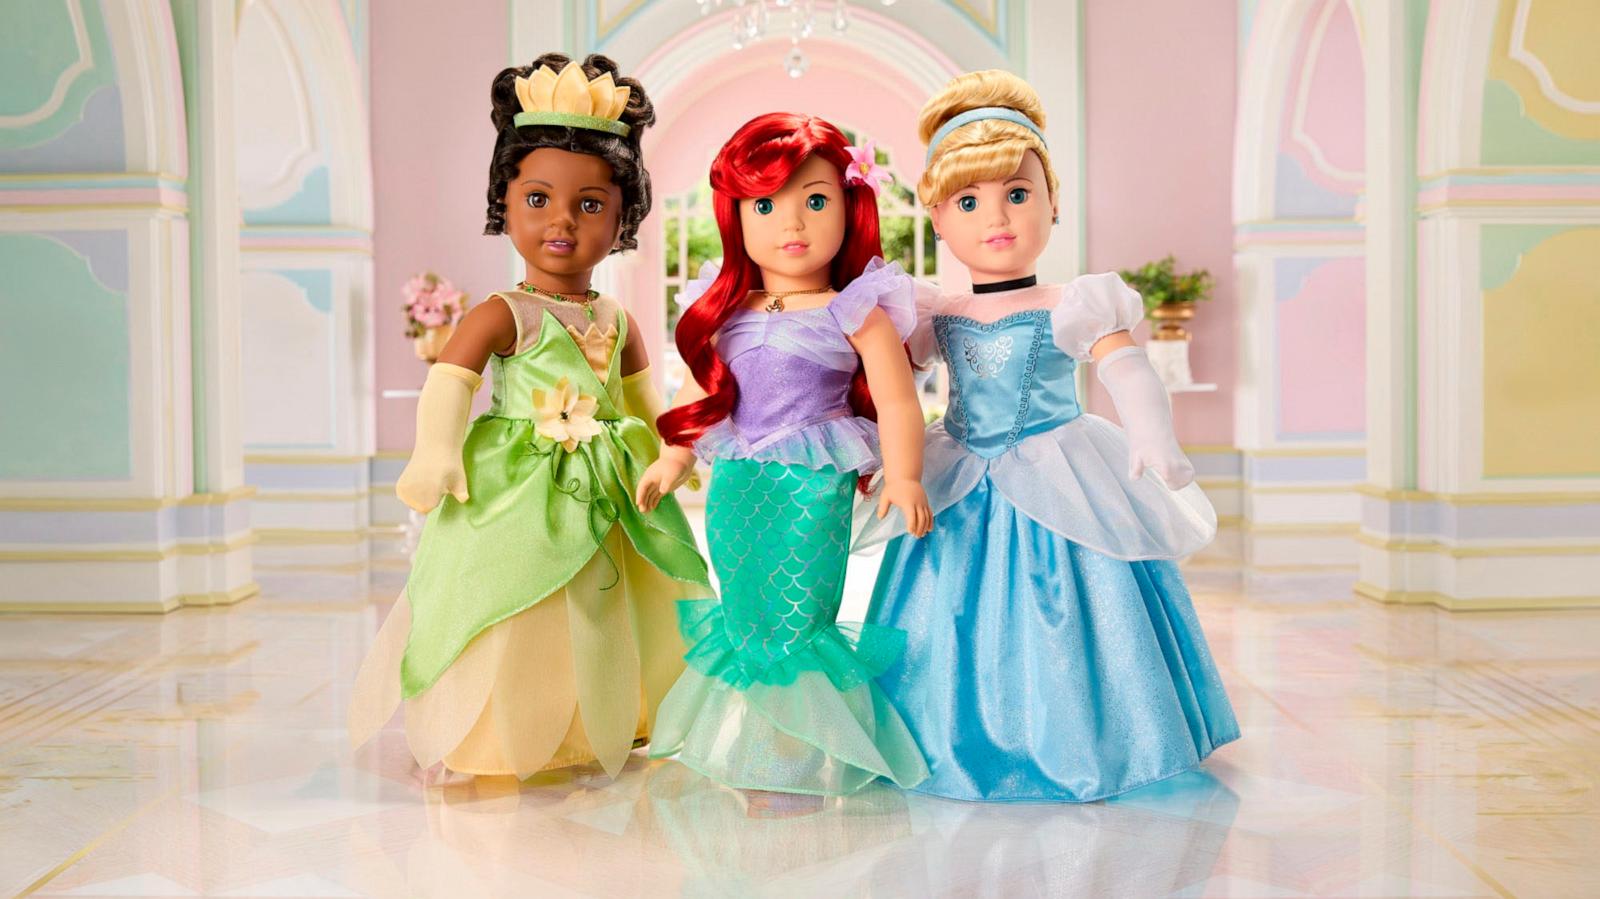 American Girl and Disney release enchanting Disney princess collection  featuring Tiana, Cinderella and Ariel - Good Morning America